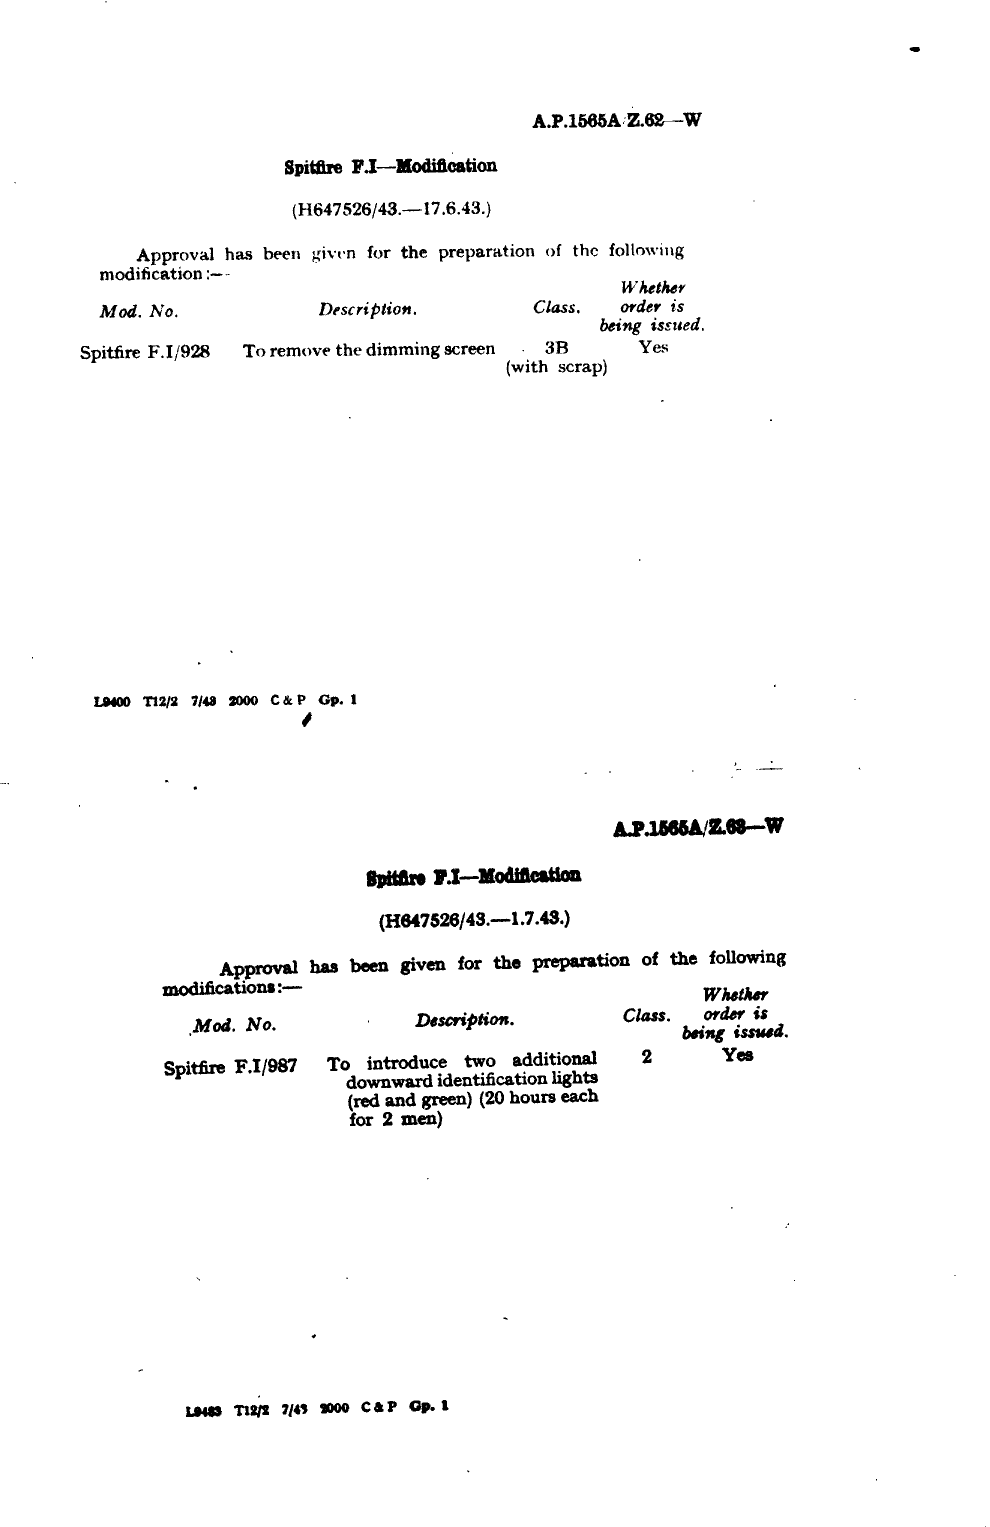 Sample page 1 from AirCorps Library document: Spitfire F.I Modification 928